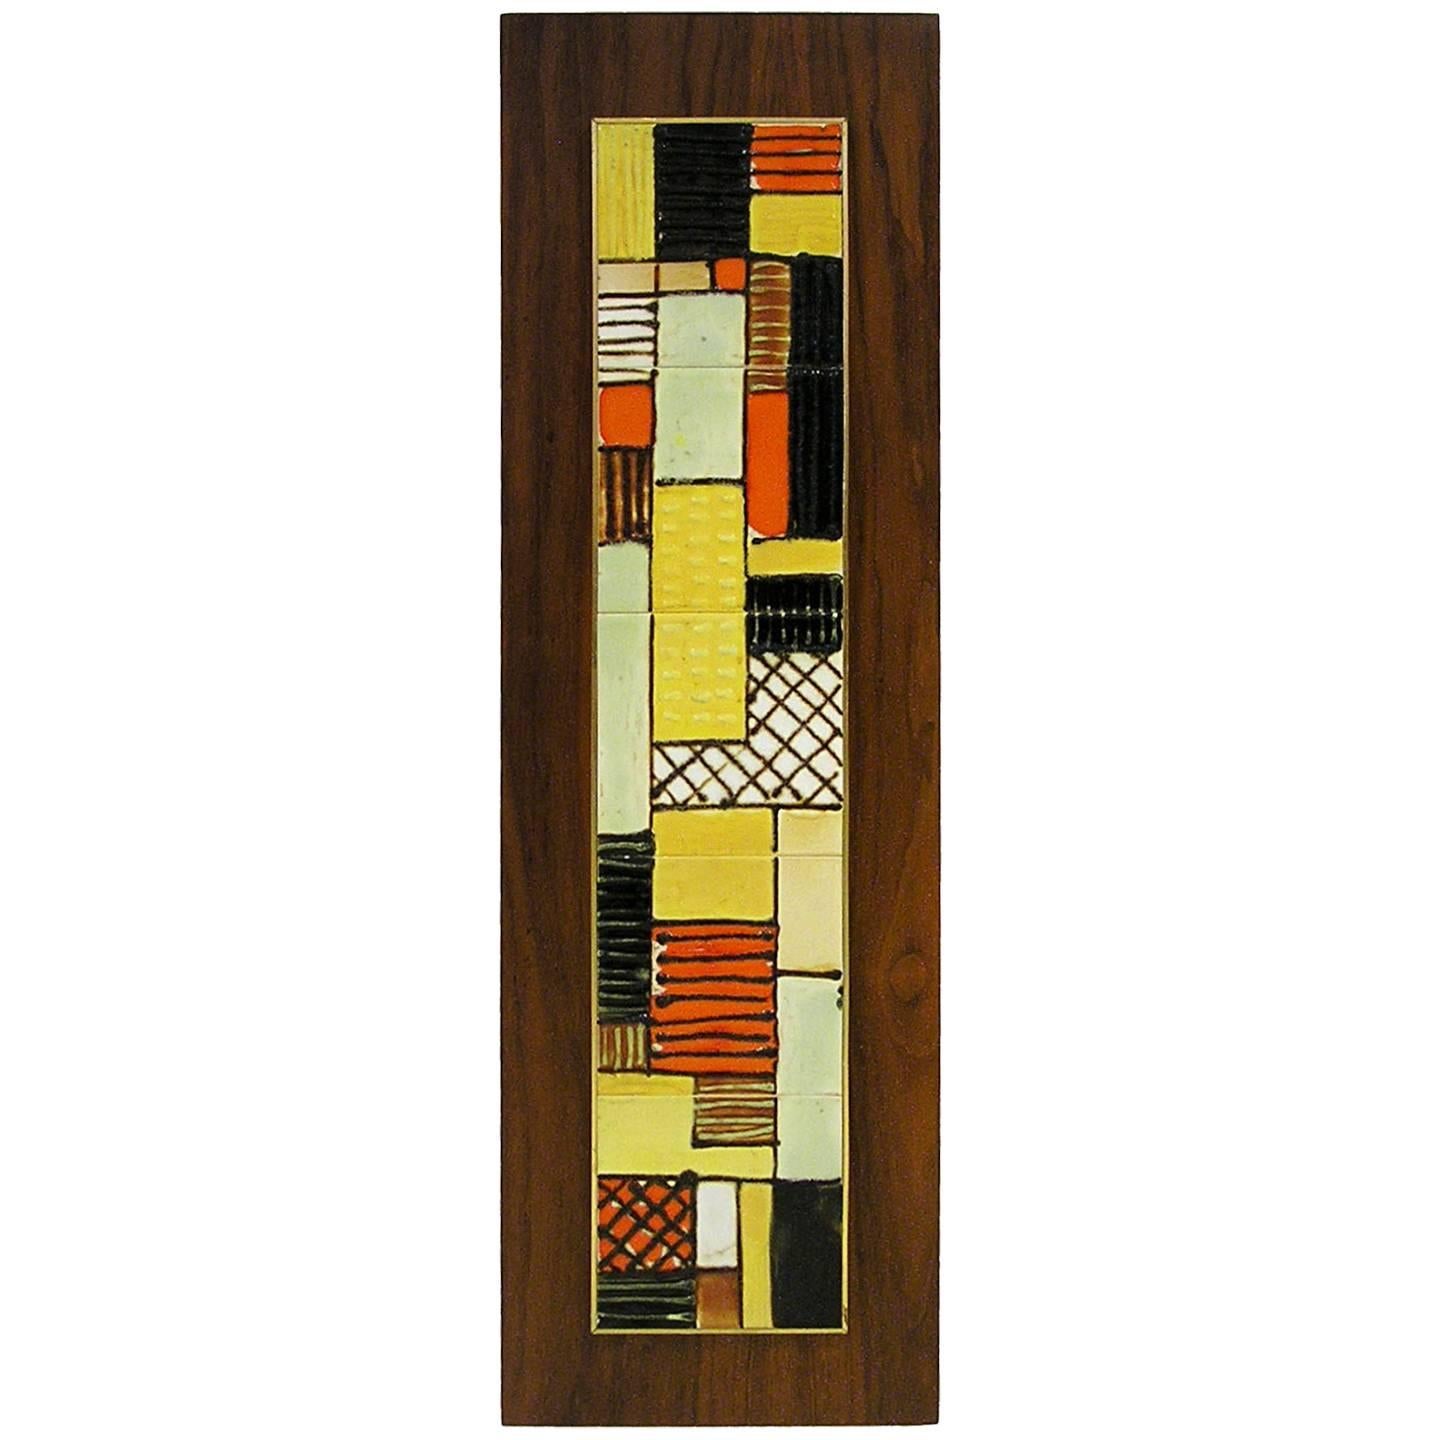 Mid-Century Modern Ceramic Tile Art Wall Plaque by Harris Strong